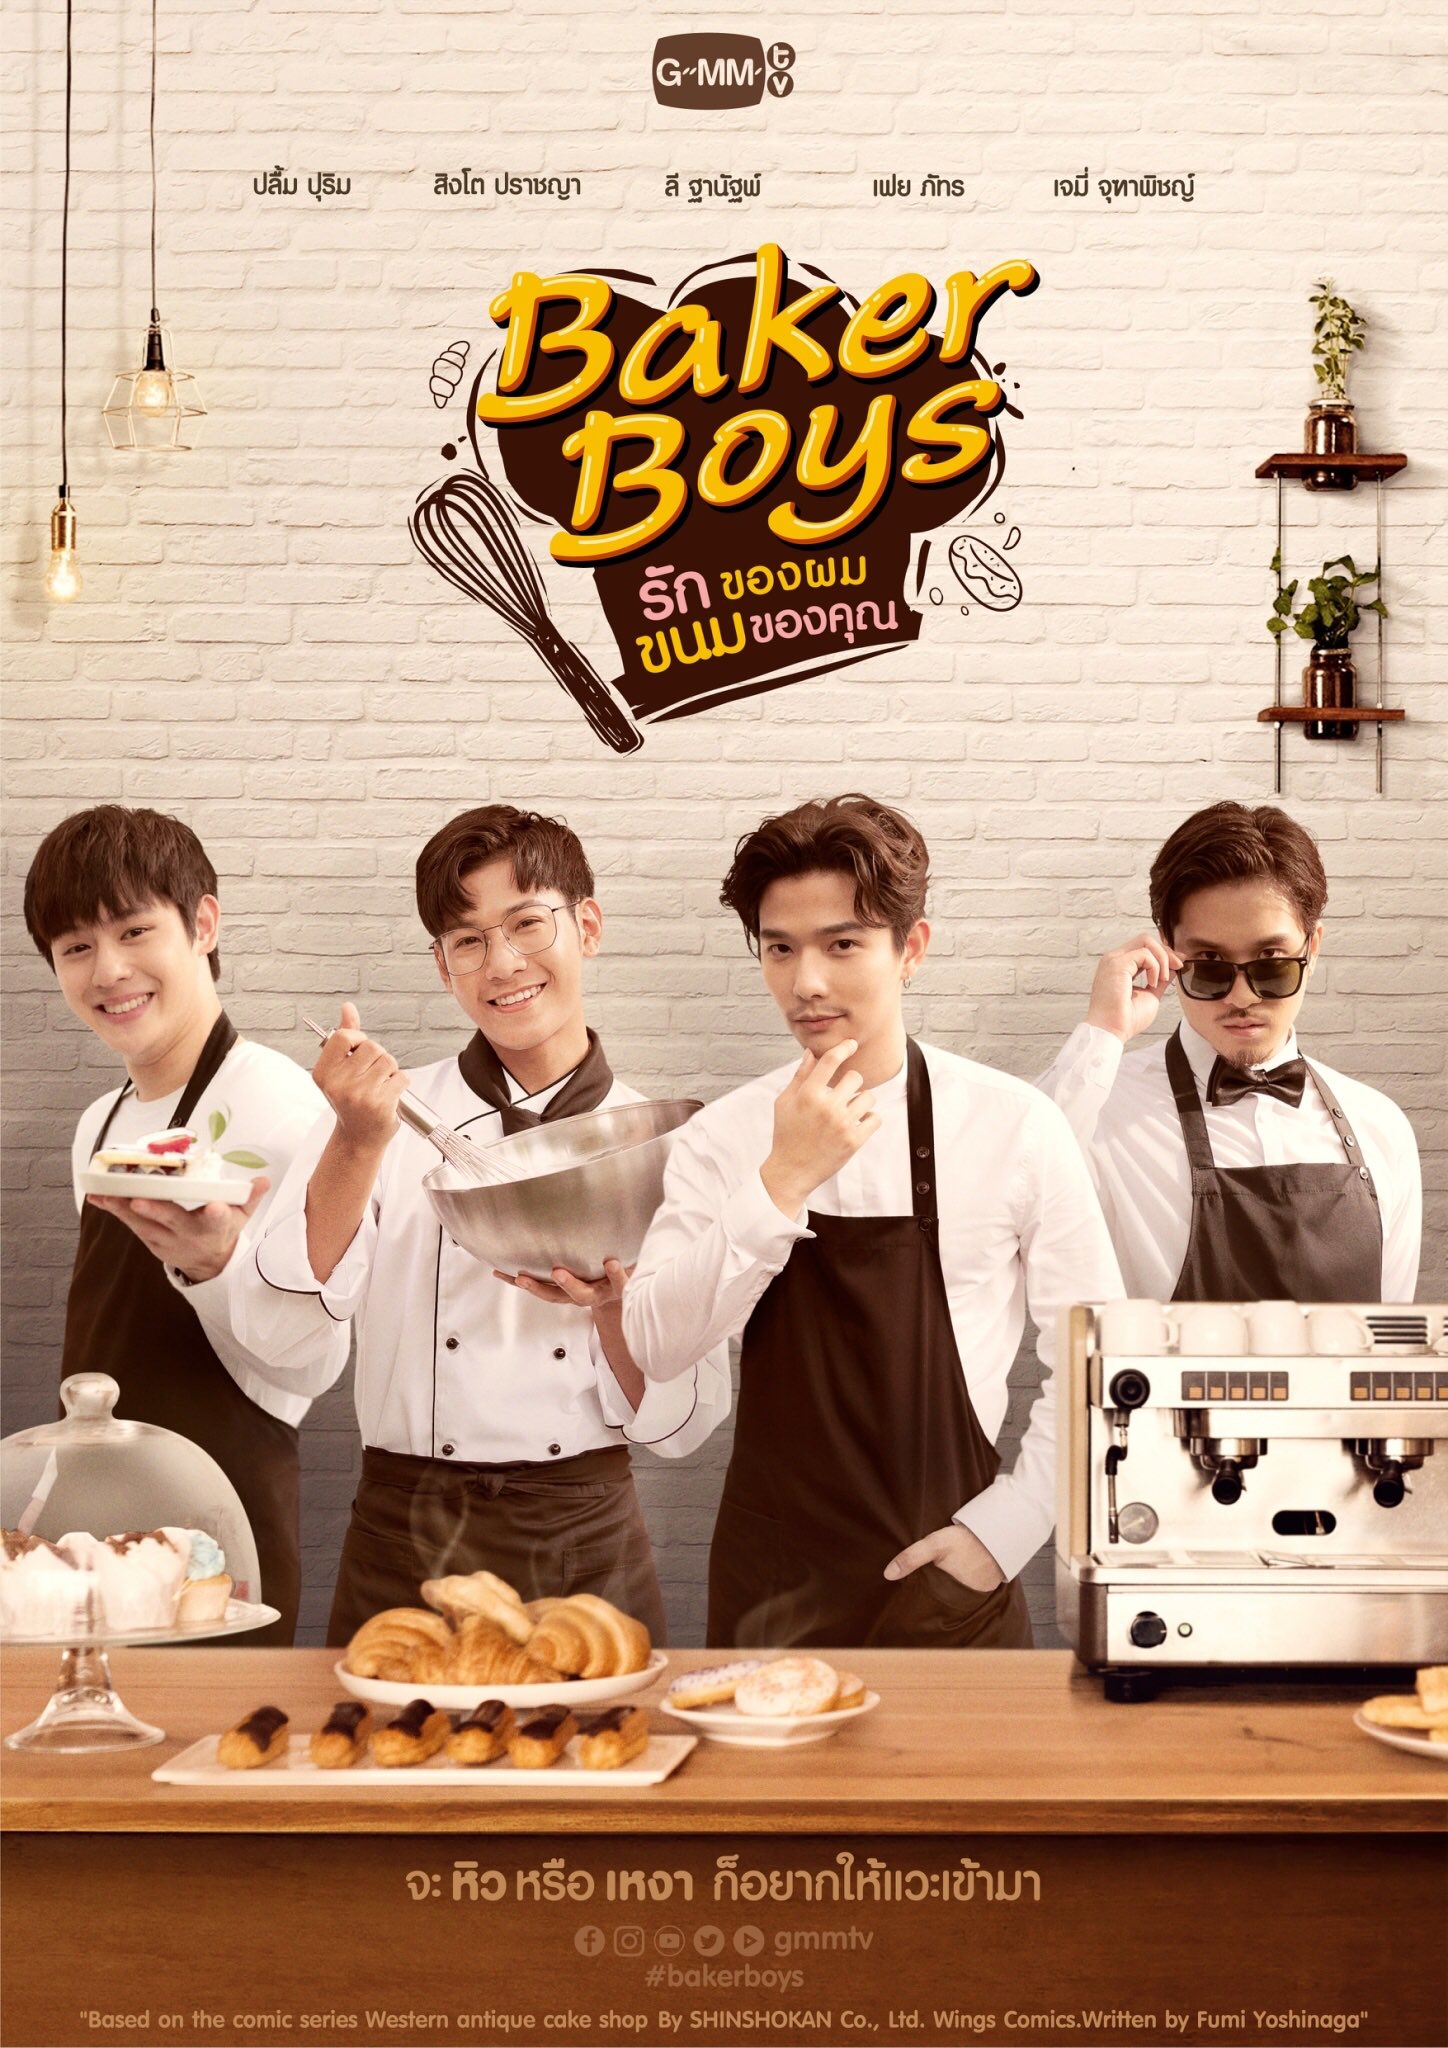 Antique Bakery Receives Thai Live-Action Series